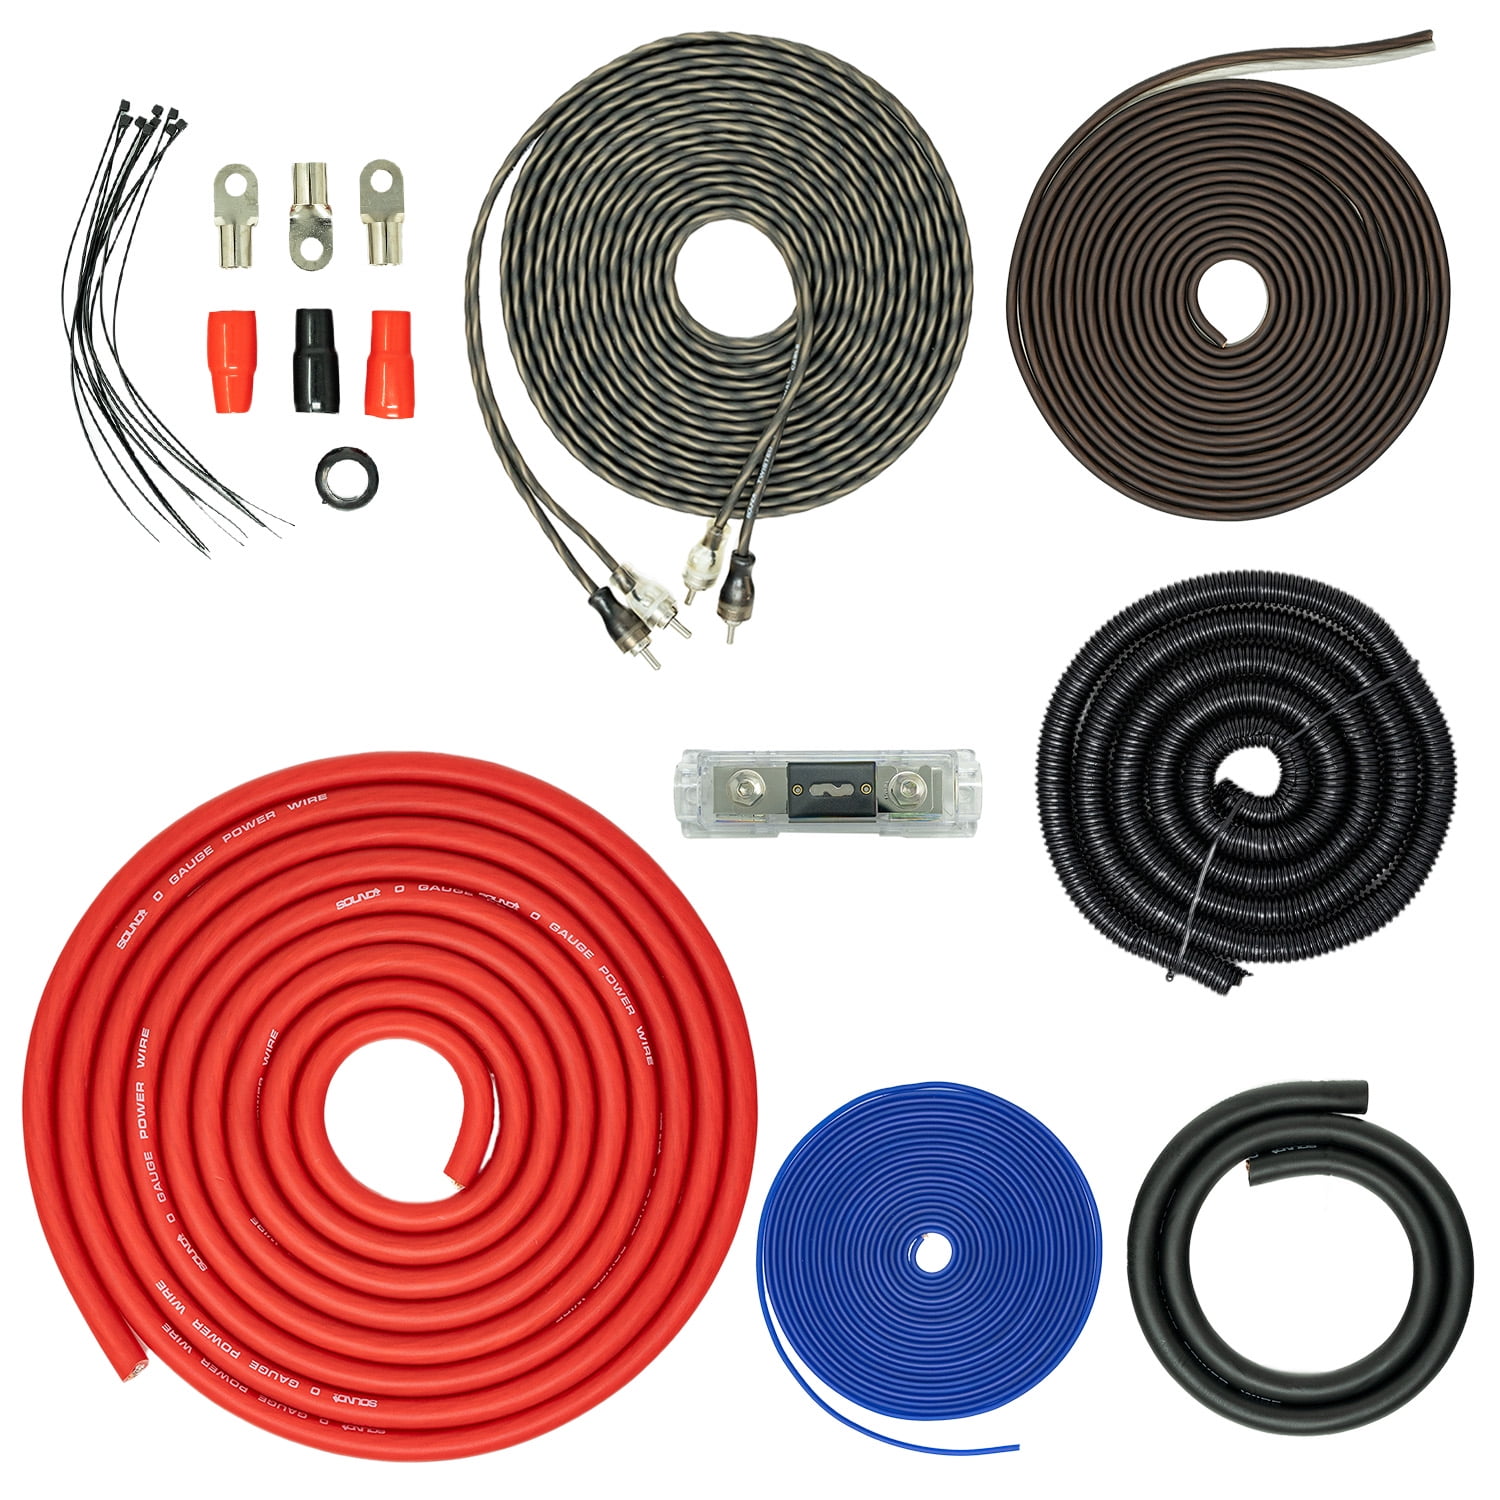 Shop for Cable Raceway Kit, Stageek Cable Management System Kit